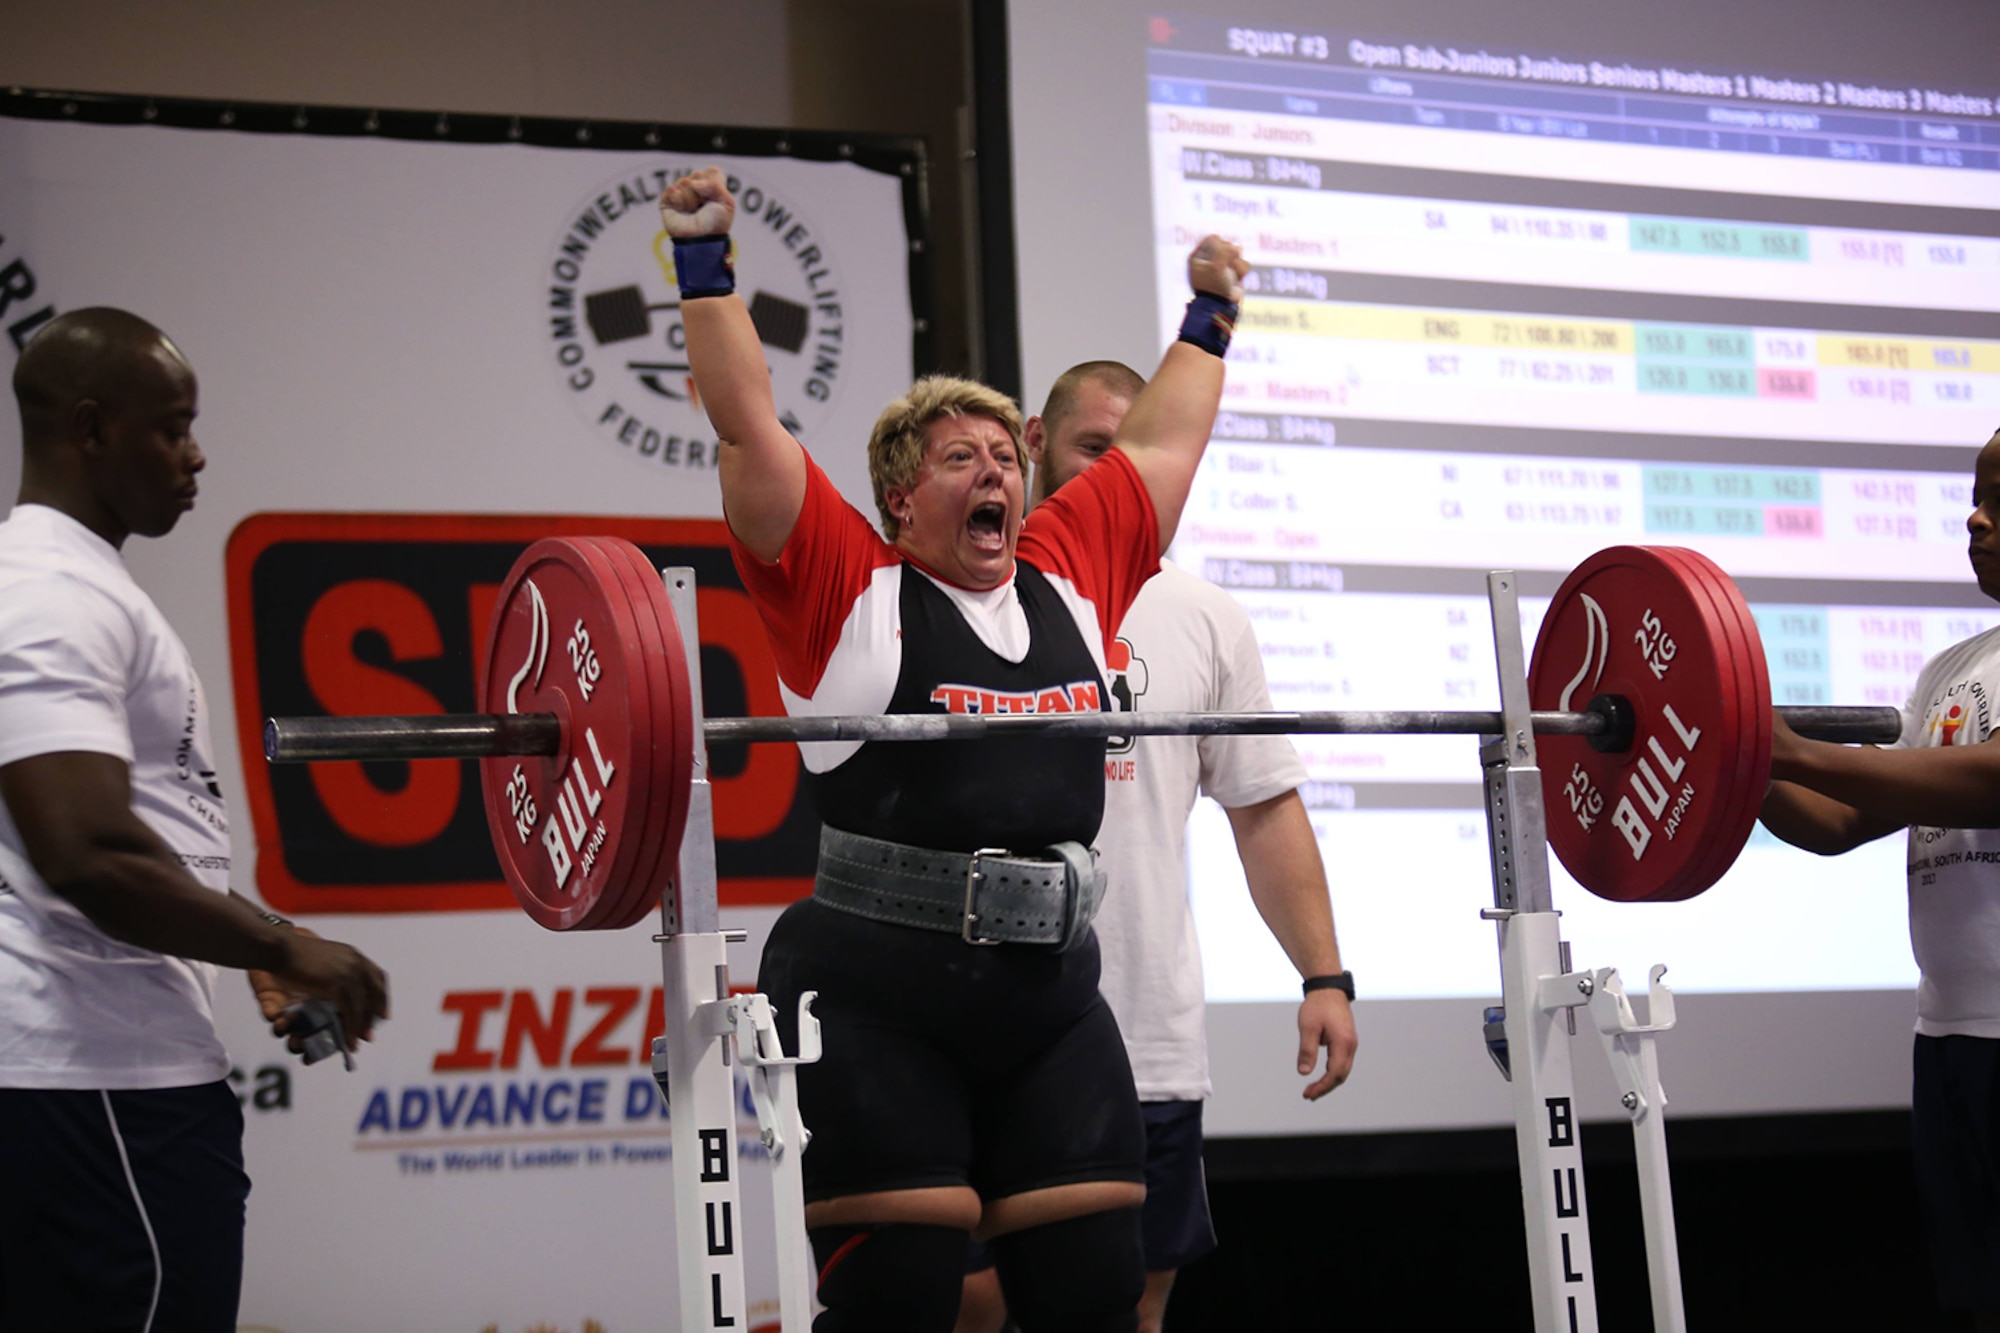 Sarah Marsden, 100th Civil Engineer Squadron environmental engineer, jumps for joy after she earned the British squat lift record for her category at the Commonwealth Powerlifting Championships in Potchefstroom, South Africa, in September 2017. Marsden won gold medals in squat, bench and deadlift categories during the competition. (Courtesy photo by Grant Hendry-Horne)